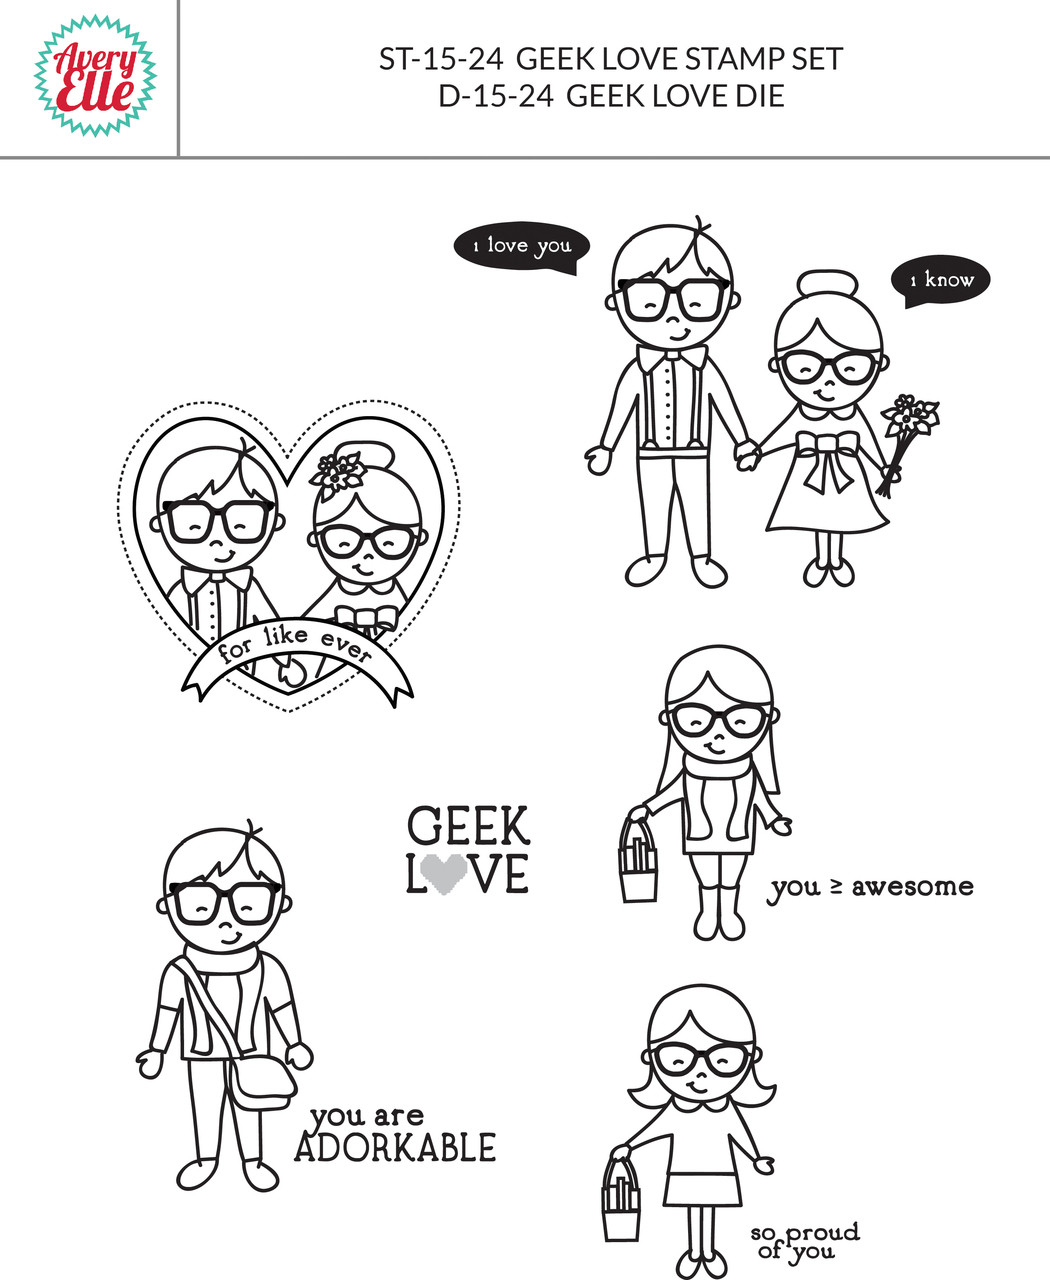 ST-15-24 Geek Love clear stamps